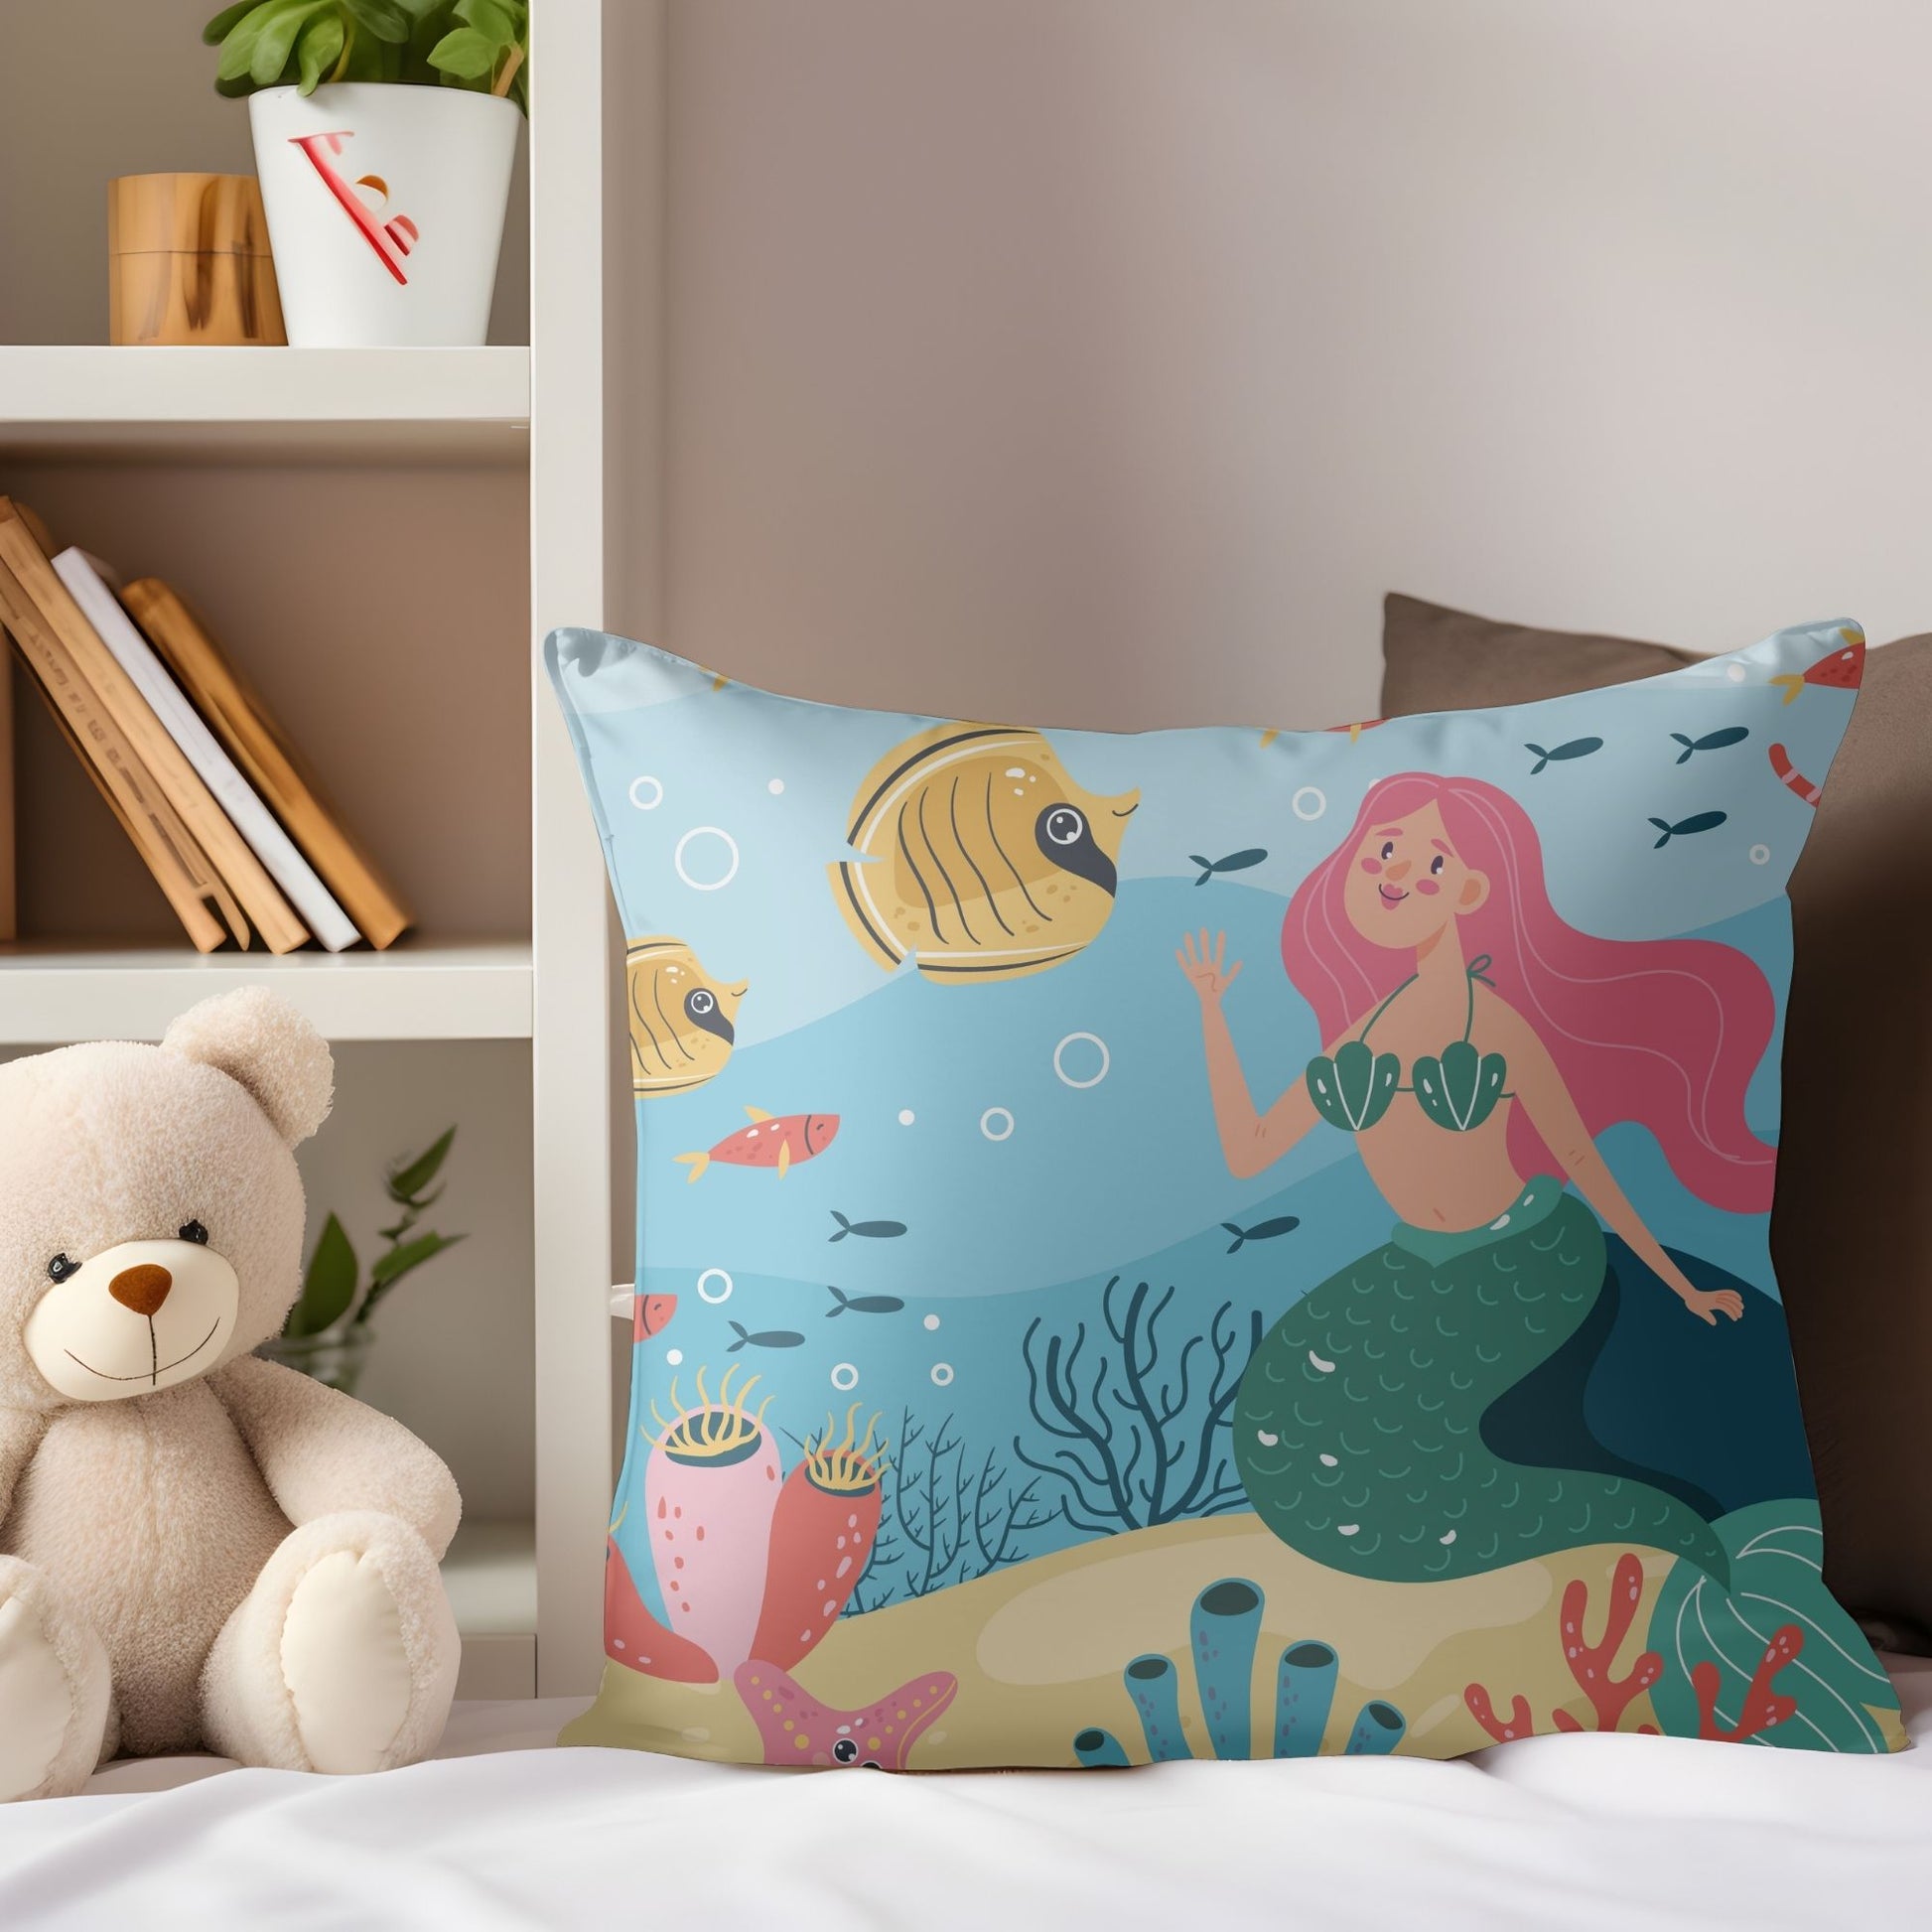 Soft pillow featuring enchanting mermaid print for girls' rooms.